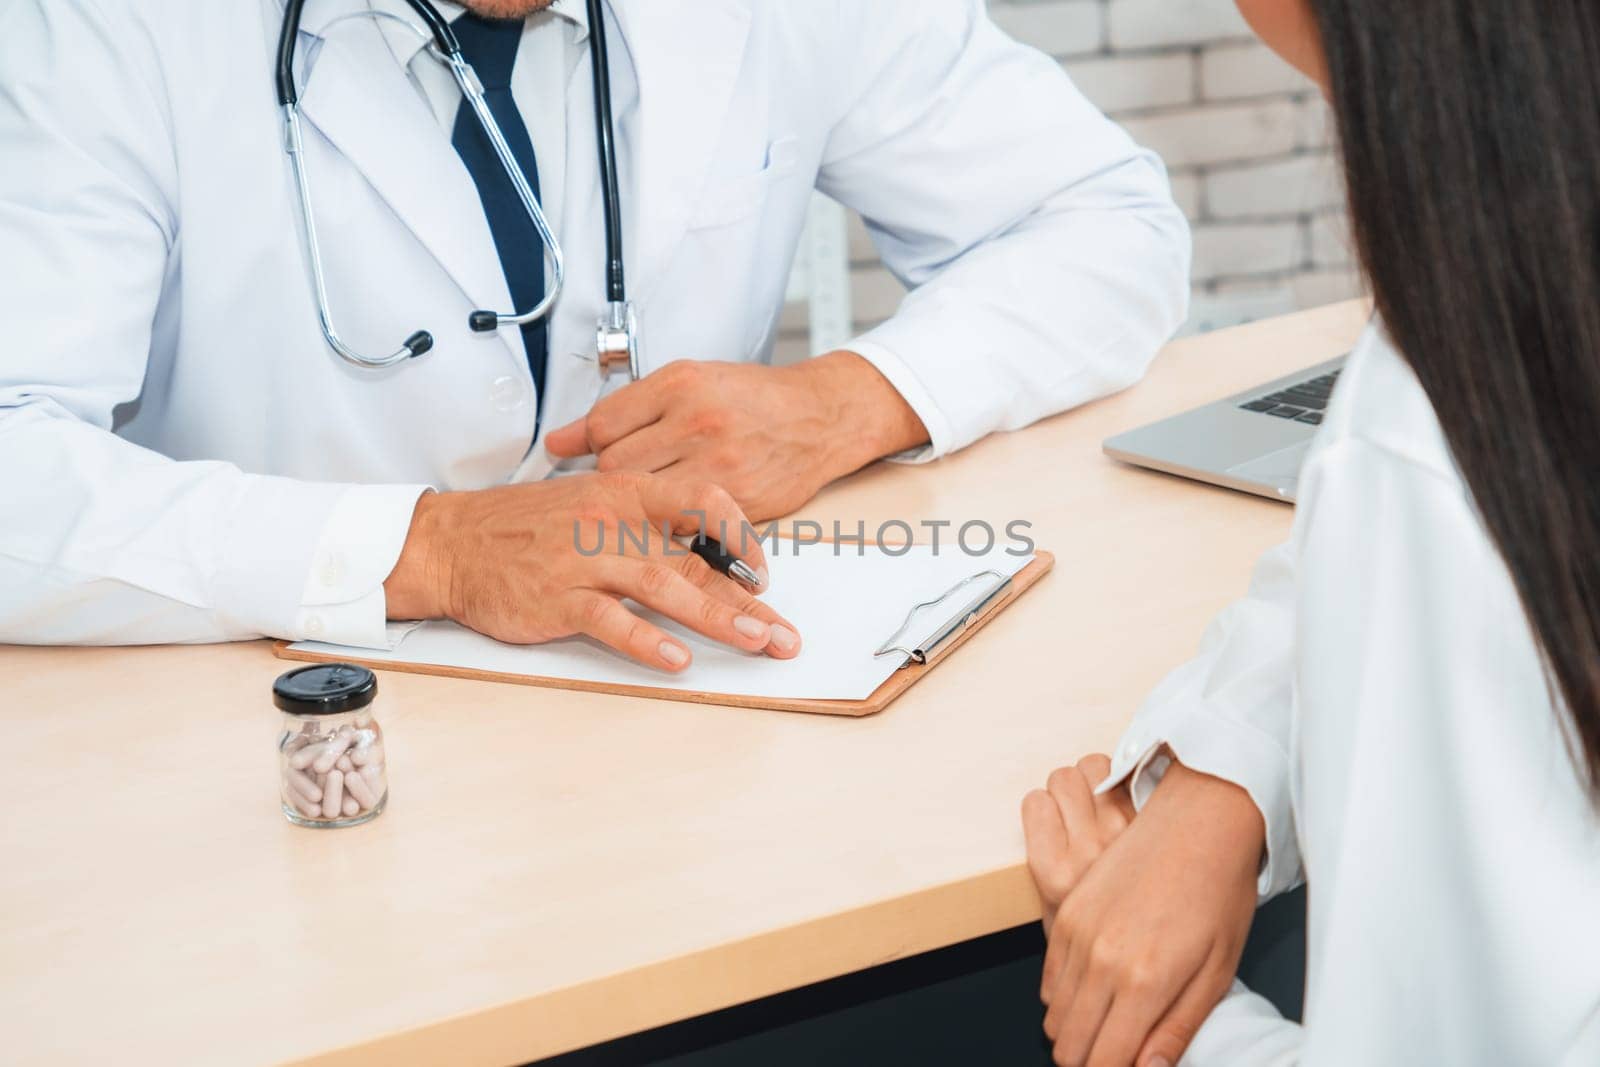 Doctor in professional uniform examining patient at hospital or medical clinic. Health care , medical and doctor staff service concept. Jivy